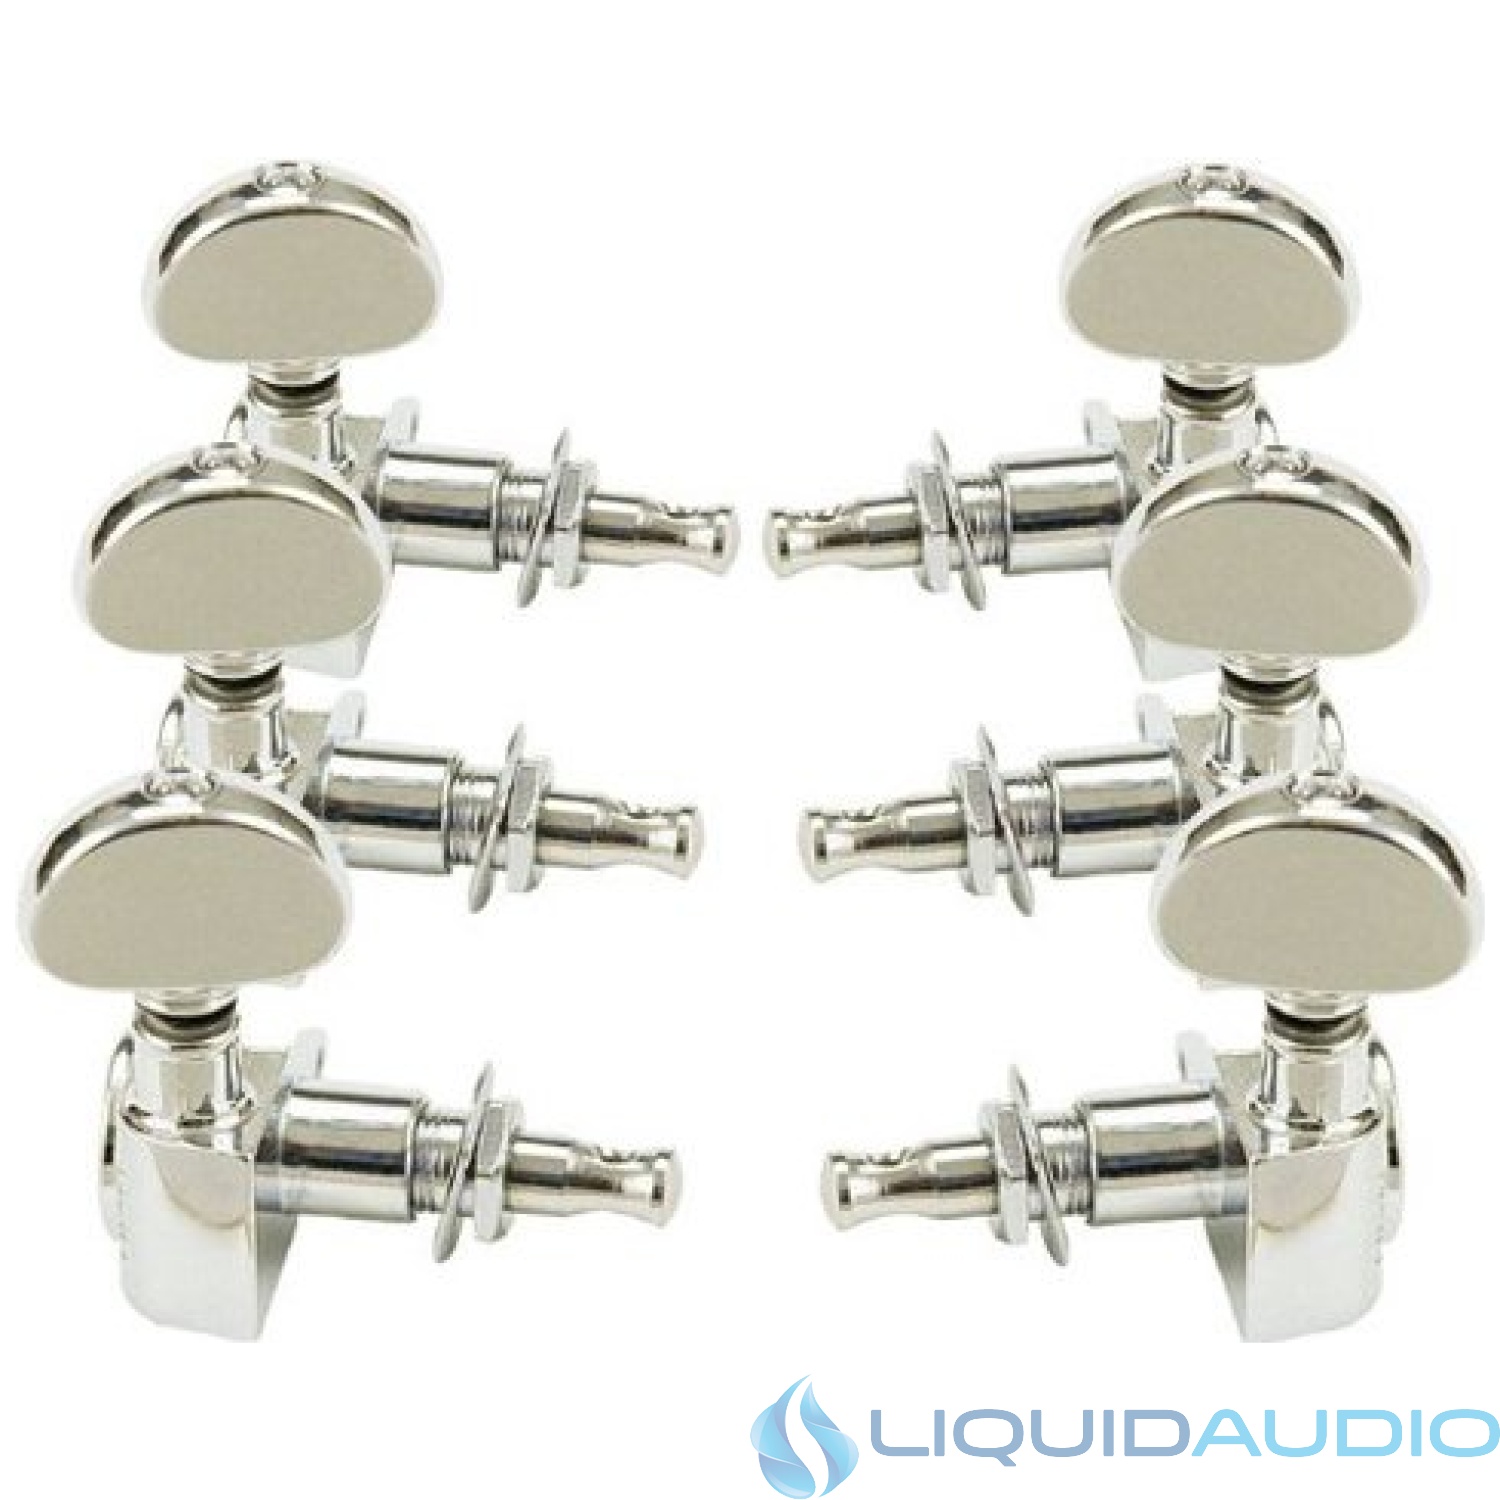 Grover Rotomatic Guitar Tuning Machines - 14:1 Ratio - 3 per side - Nickel